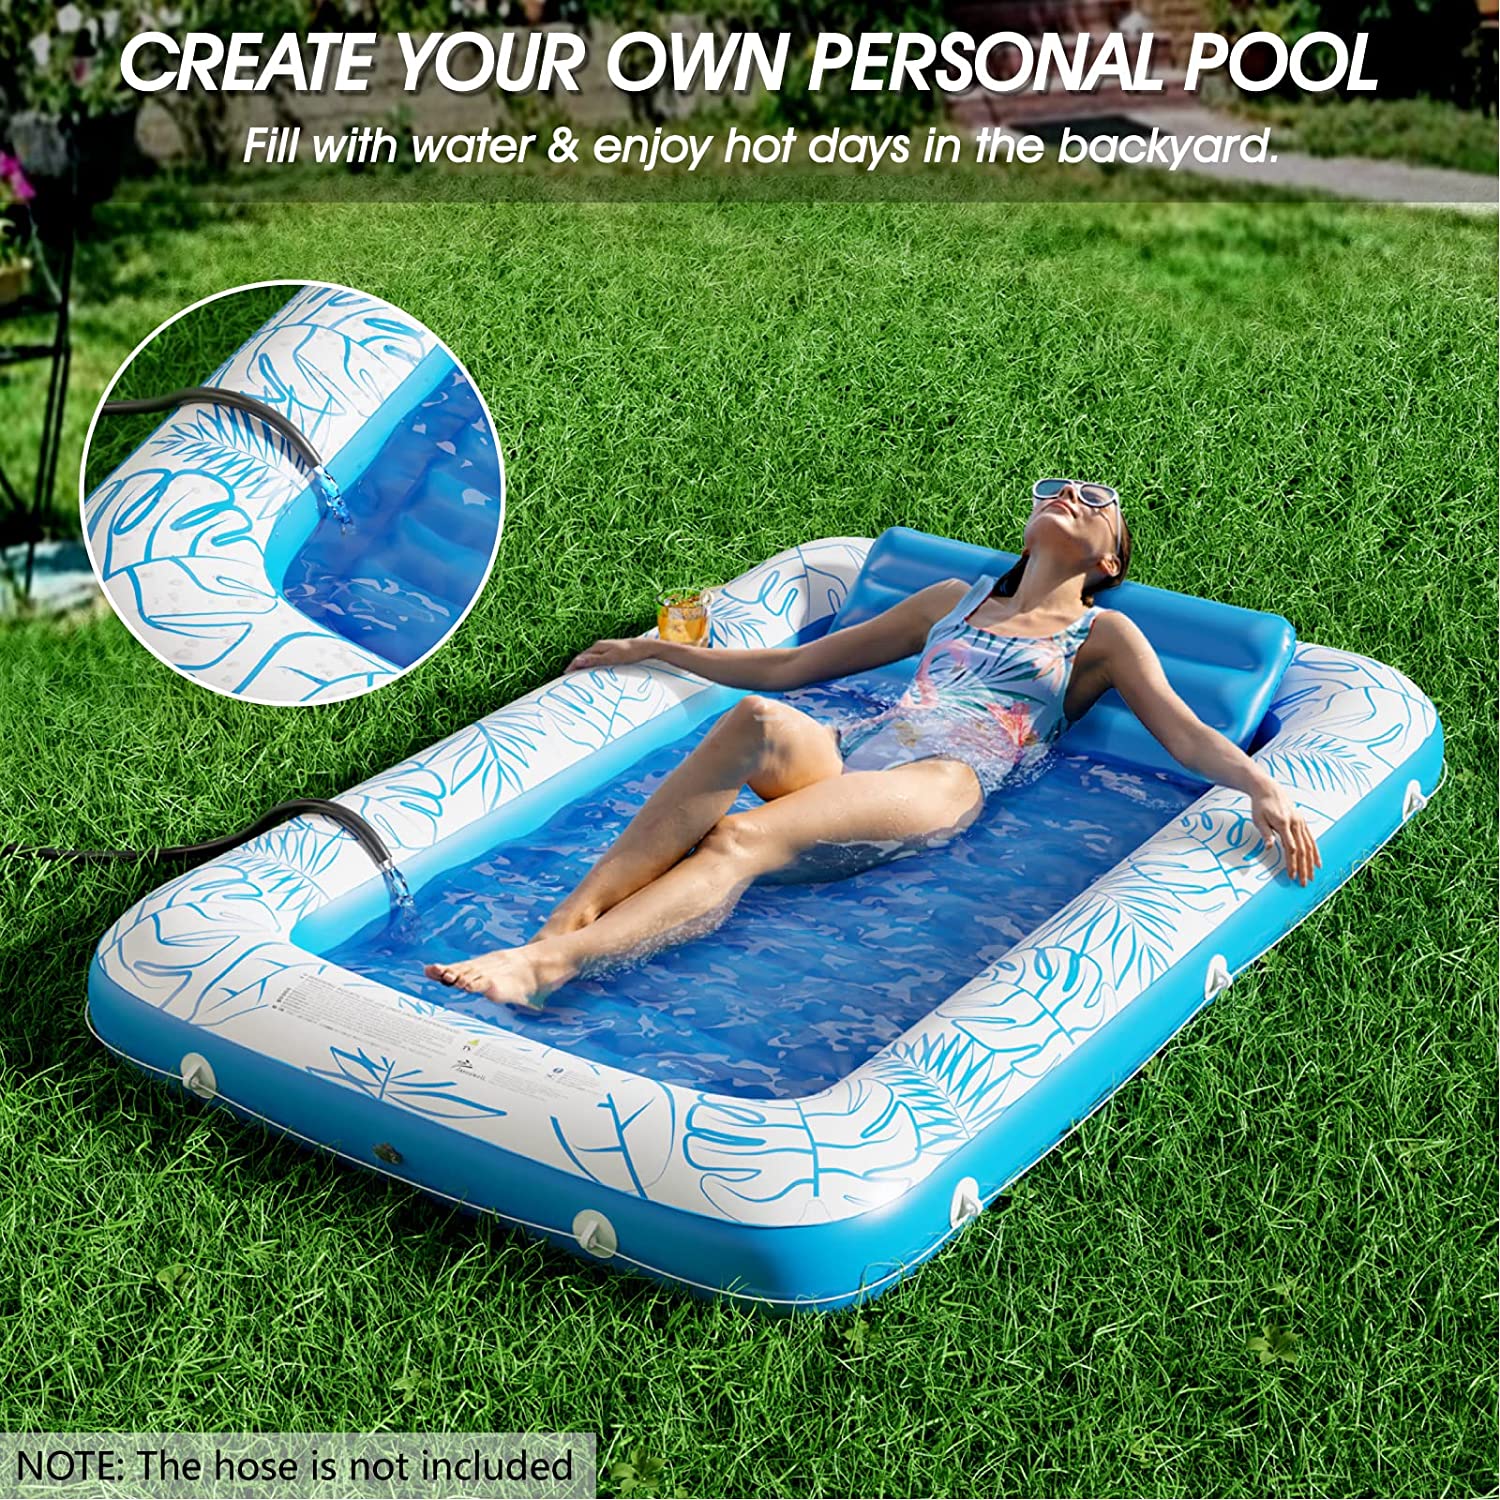 Create Your Own Personal Pool With the Inflatable Tanning Pool Lounger